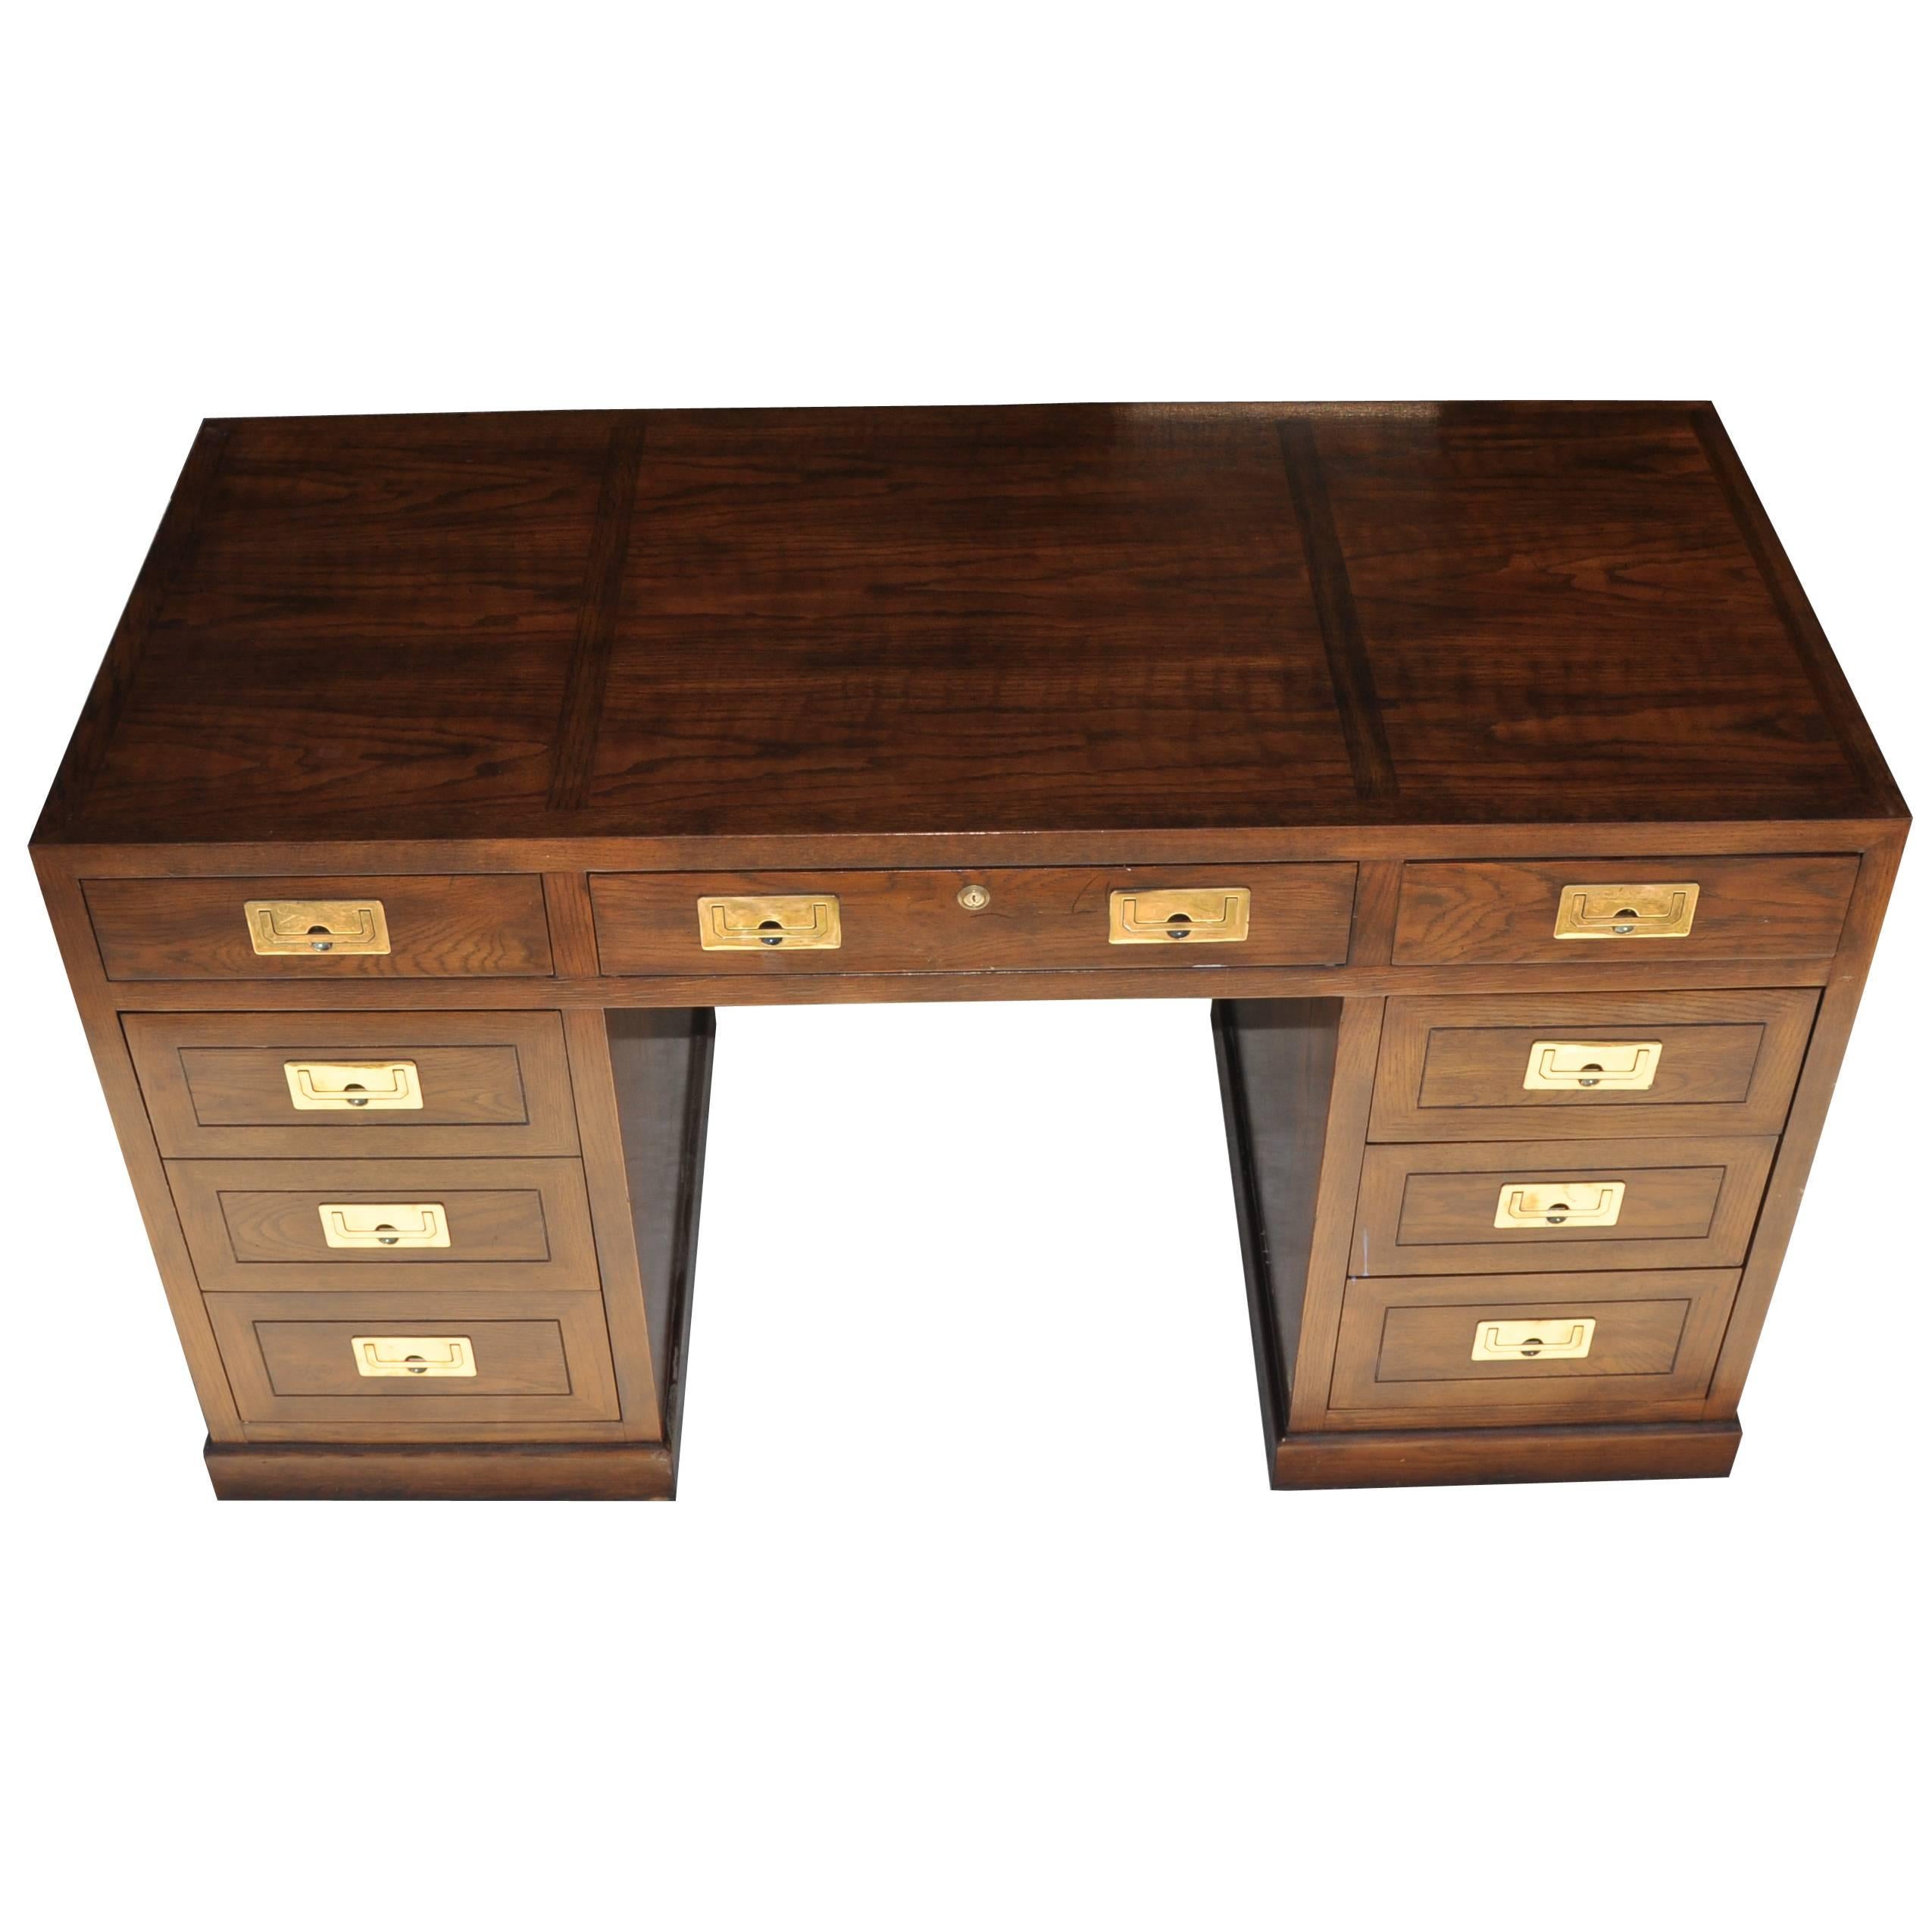 Mid-Century Modern Campaign style desk with brass pulls by Henredon 


Mid-Century Modern Campaign desk made by Henredon with a fruitwood finish and dove tail construction. Finished on all sides with brass hardware. Eight drawers including one file